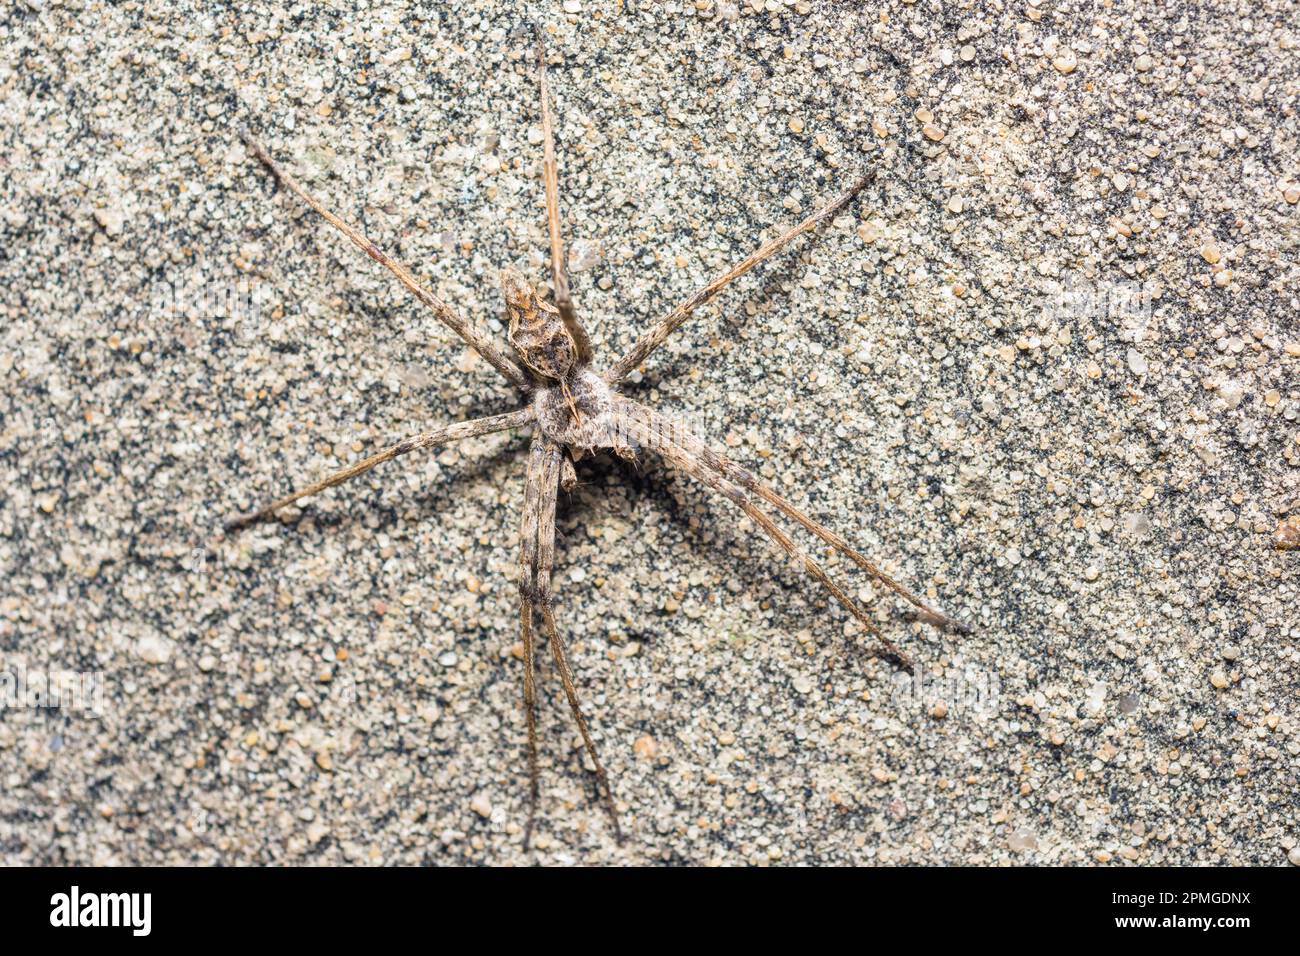 Camouflaged spider on a granulated wall Stock Photo